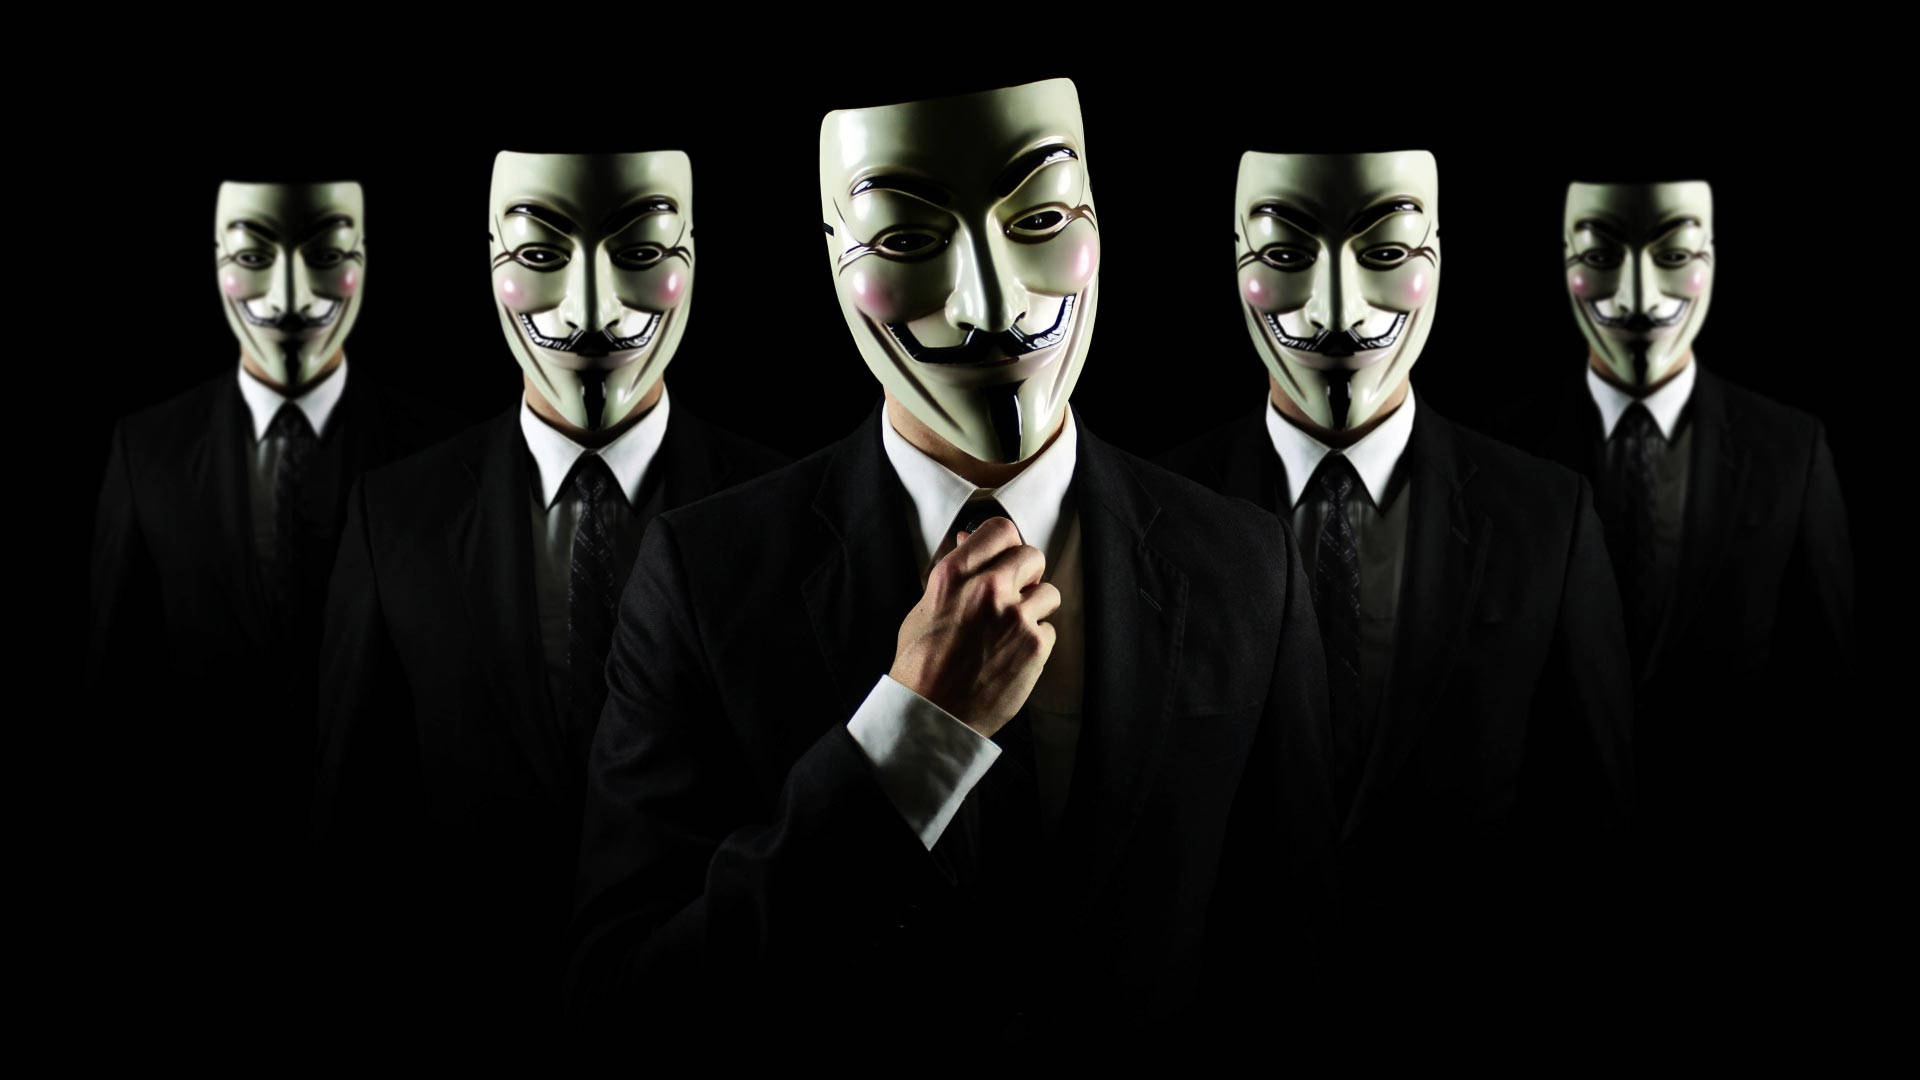 anonymous hackers hd